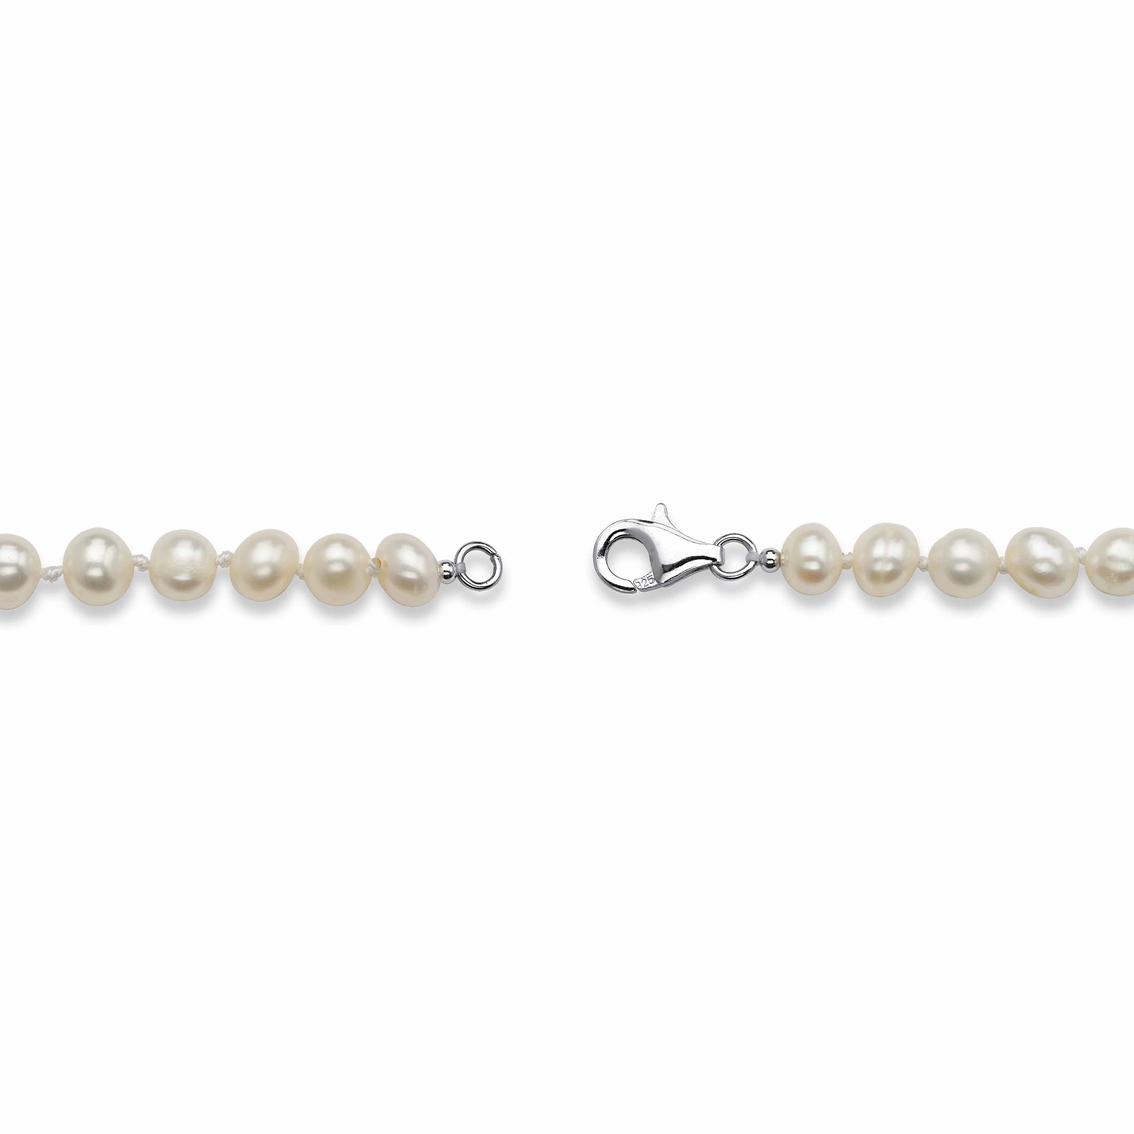 PalmBeach 3-Piece Cultured Freshwater Pearl Sterling Silver Jewelry Set - Image 2 of 5